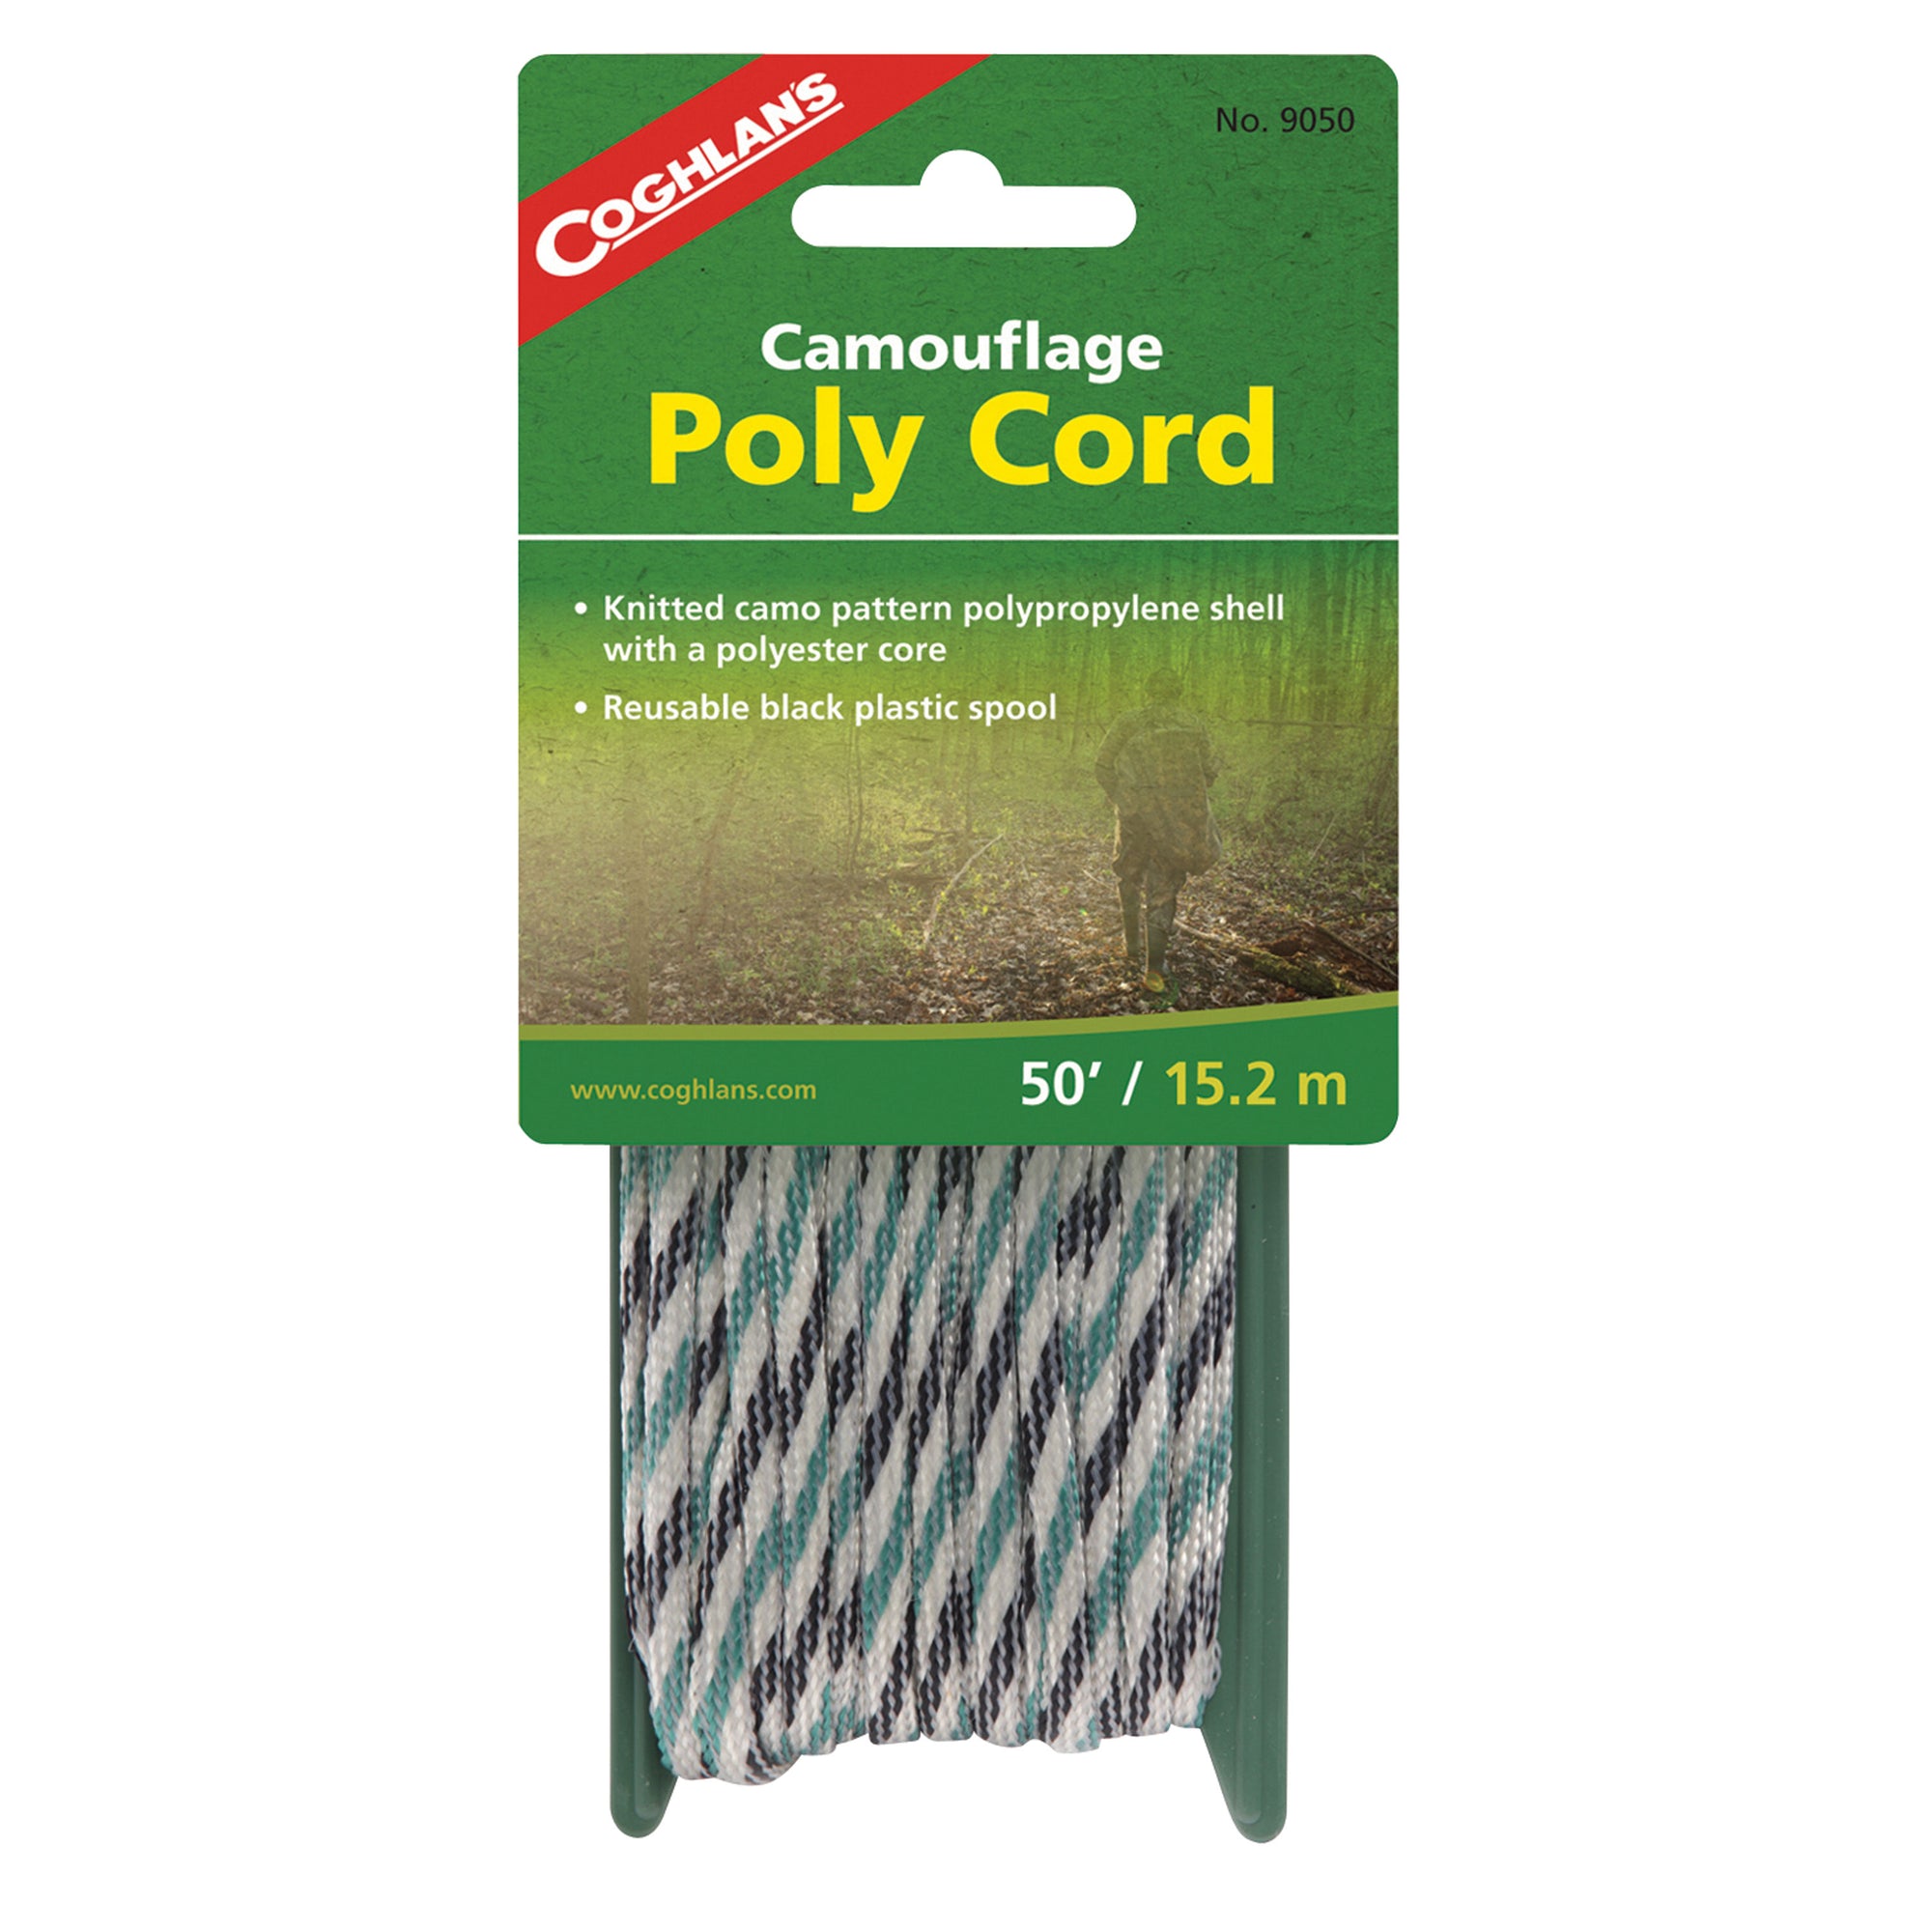 Coghlan's 9050 Camouflage Poly Cord - 50'